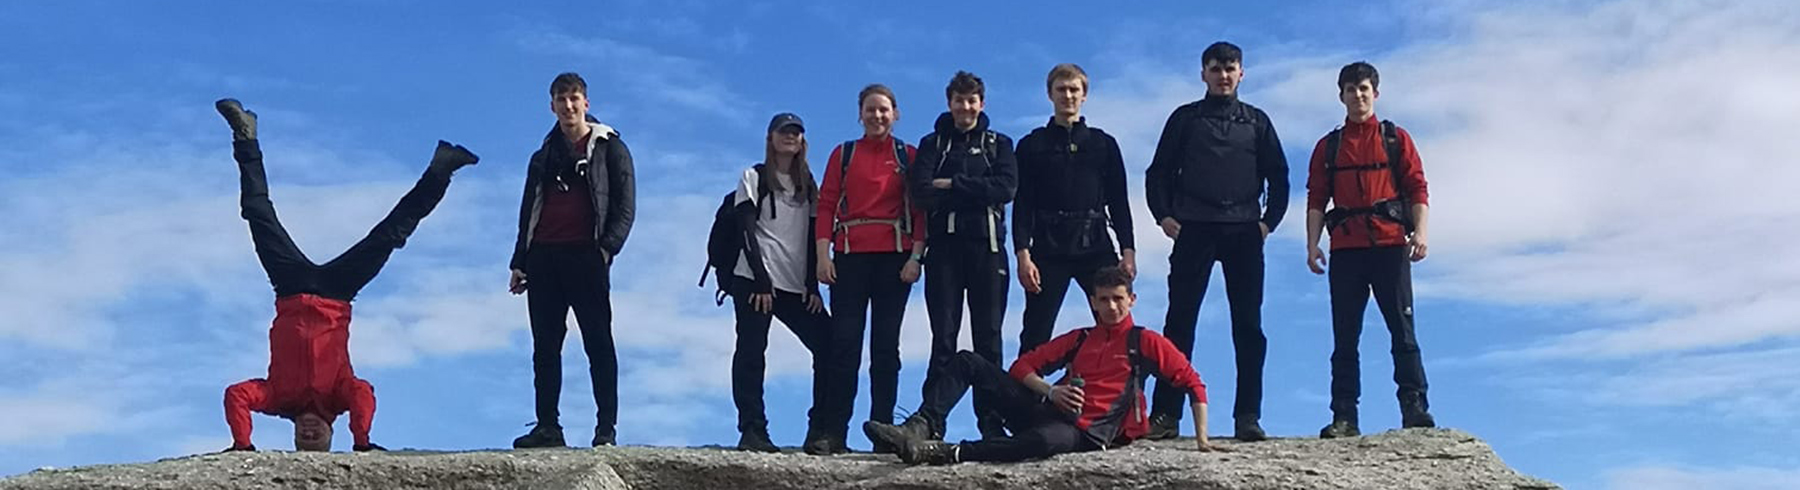 Group of students on top of rock formation